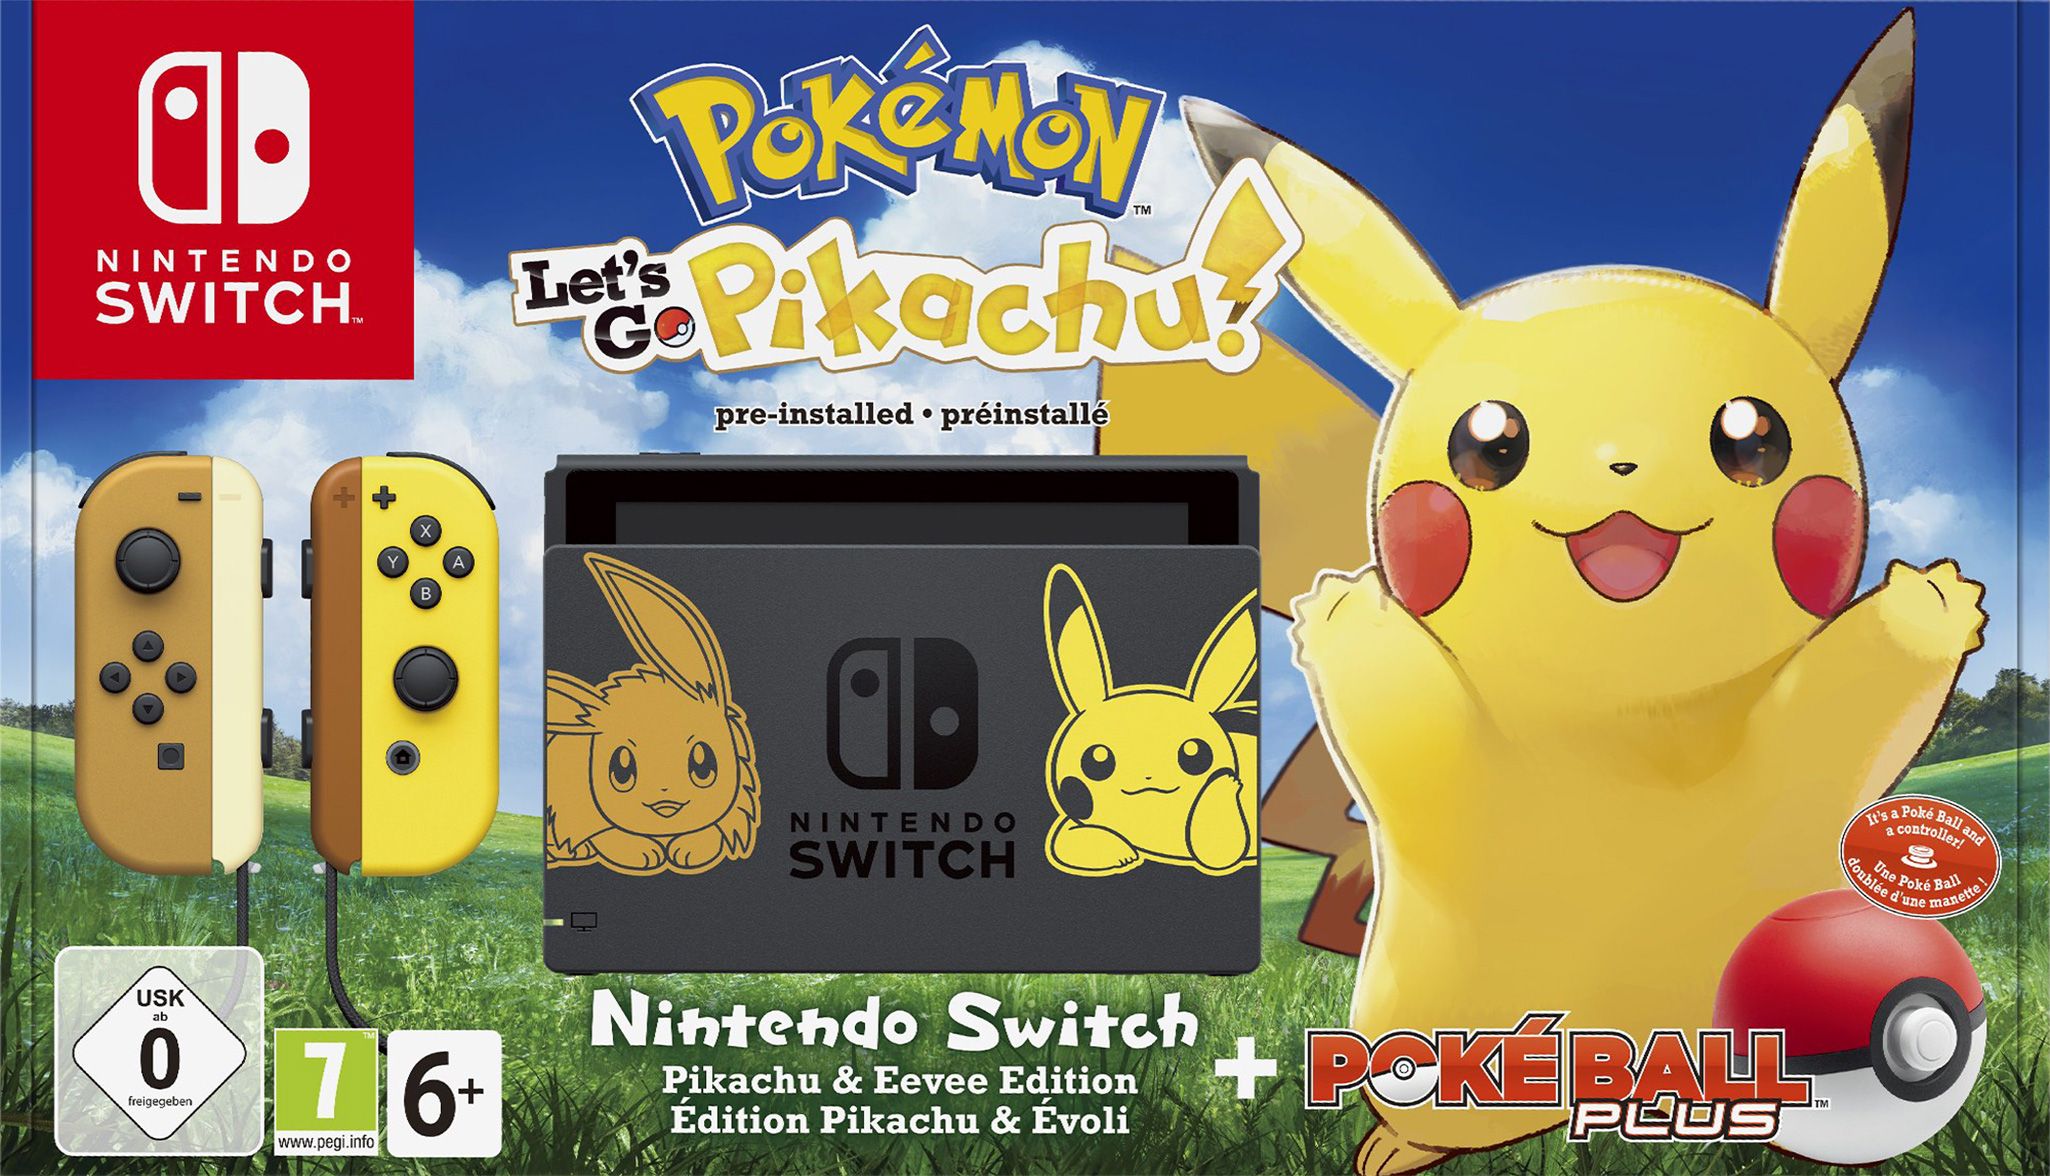 nintendo switch let's go pikachu limited edition console